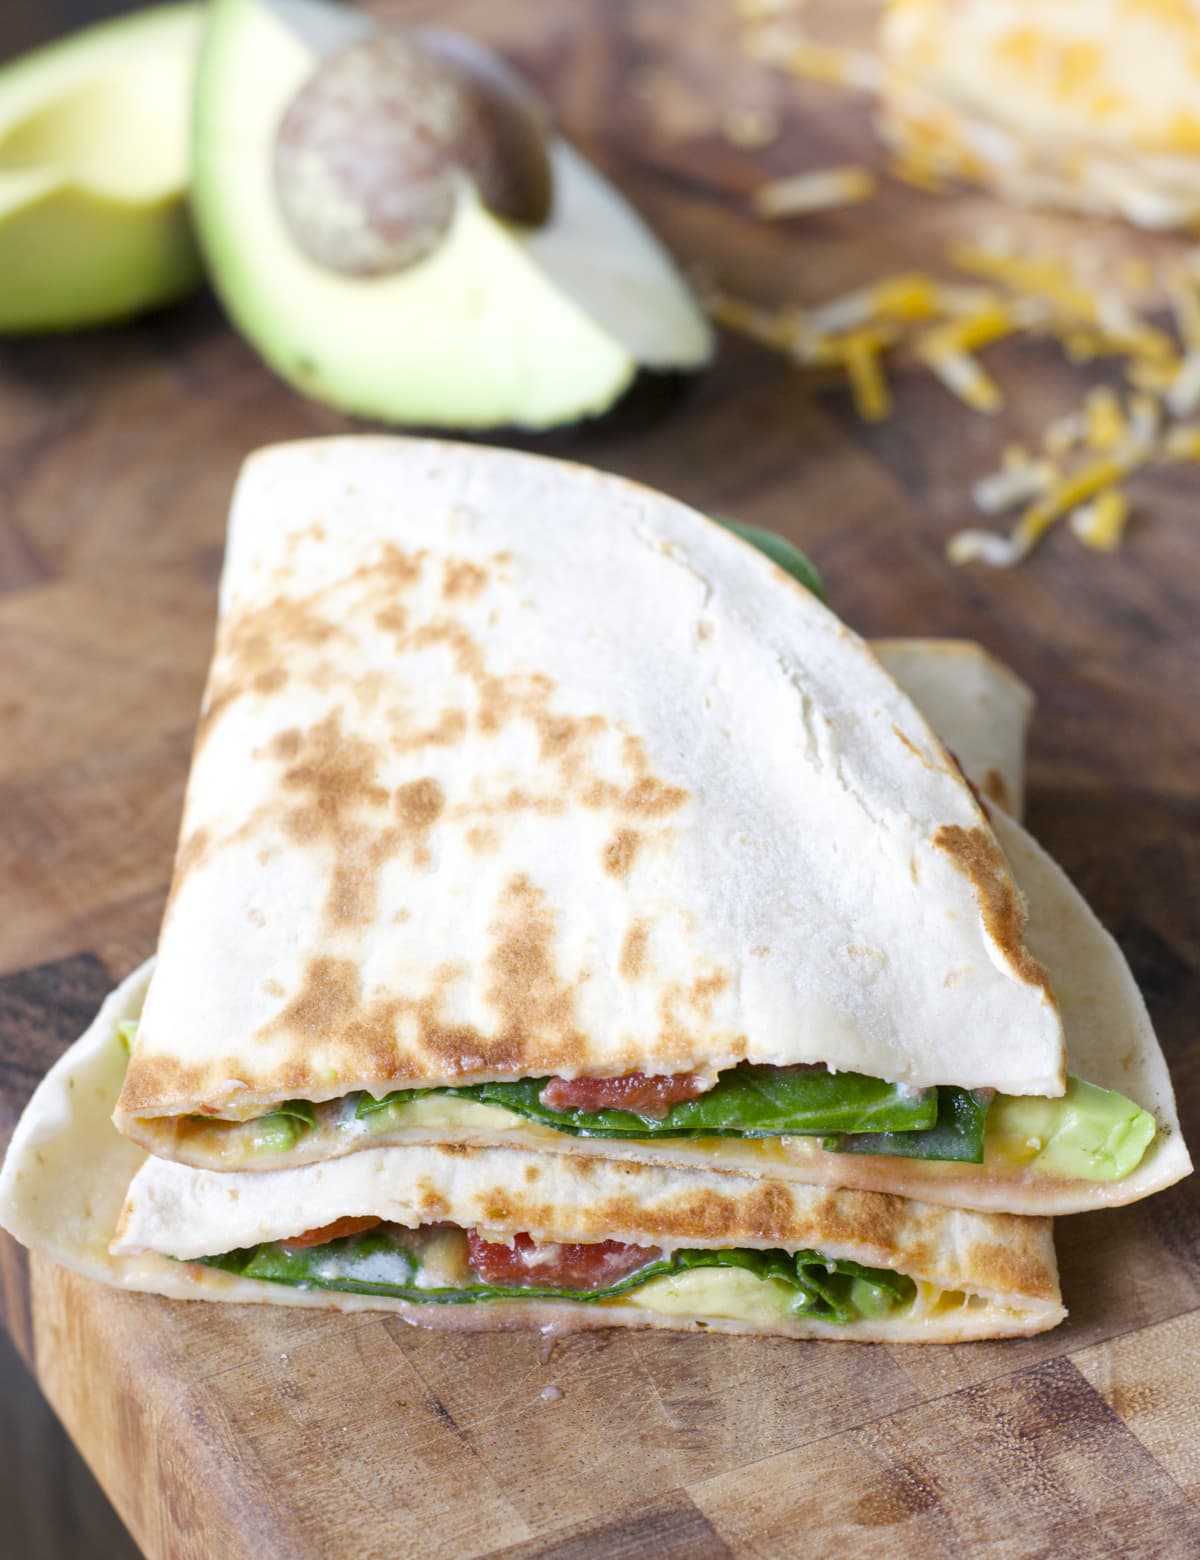 This Avocado Quesadilla is a simple six ingredient meal! A healthy, hearty dinner perfect for busy nights!